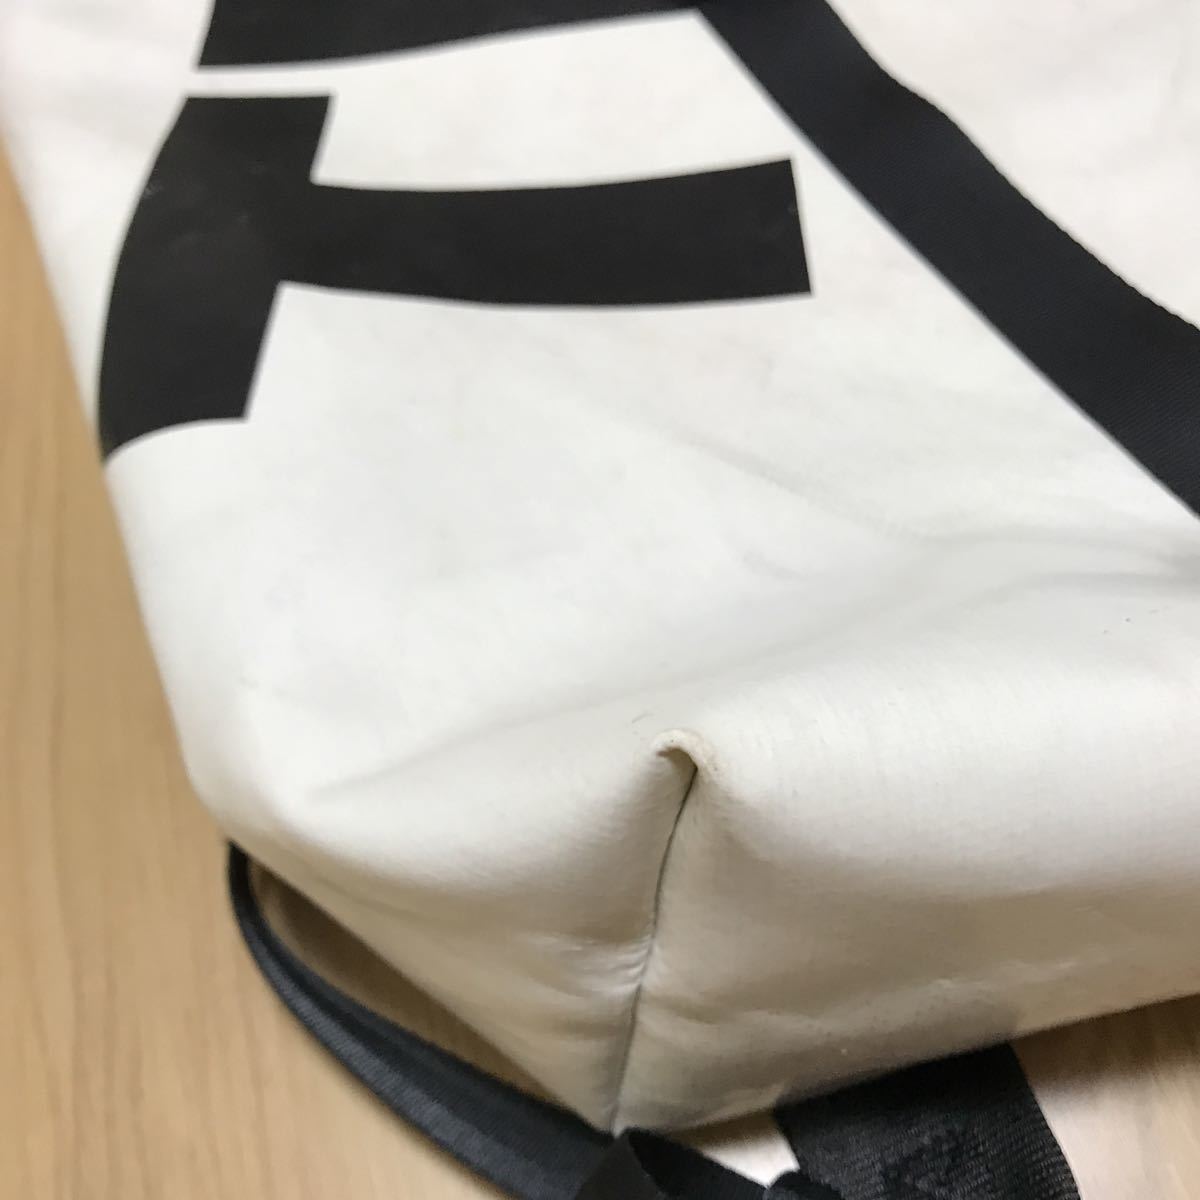 FREITAG F155 CLAPTON リックサック フライターグ クラプトン /【Buyee】 "Buyee" Japanese